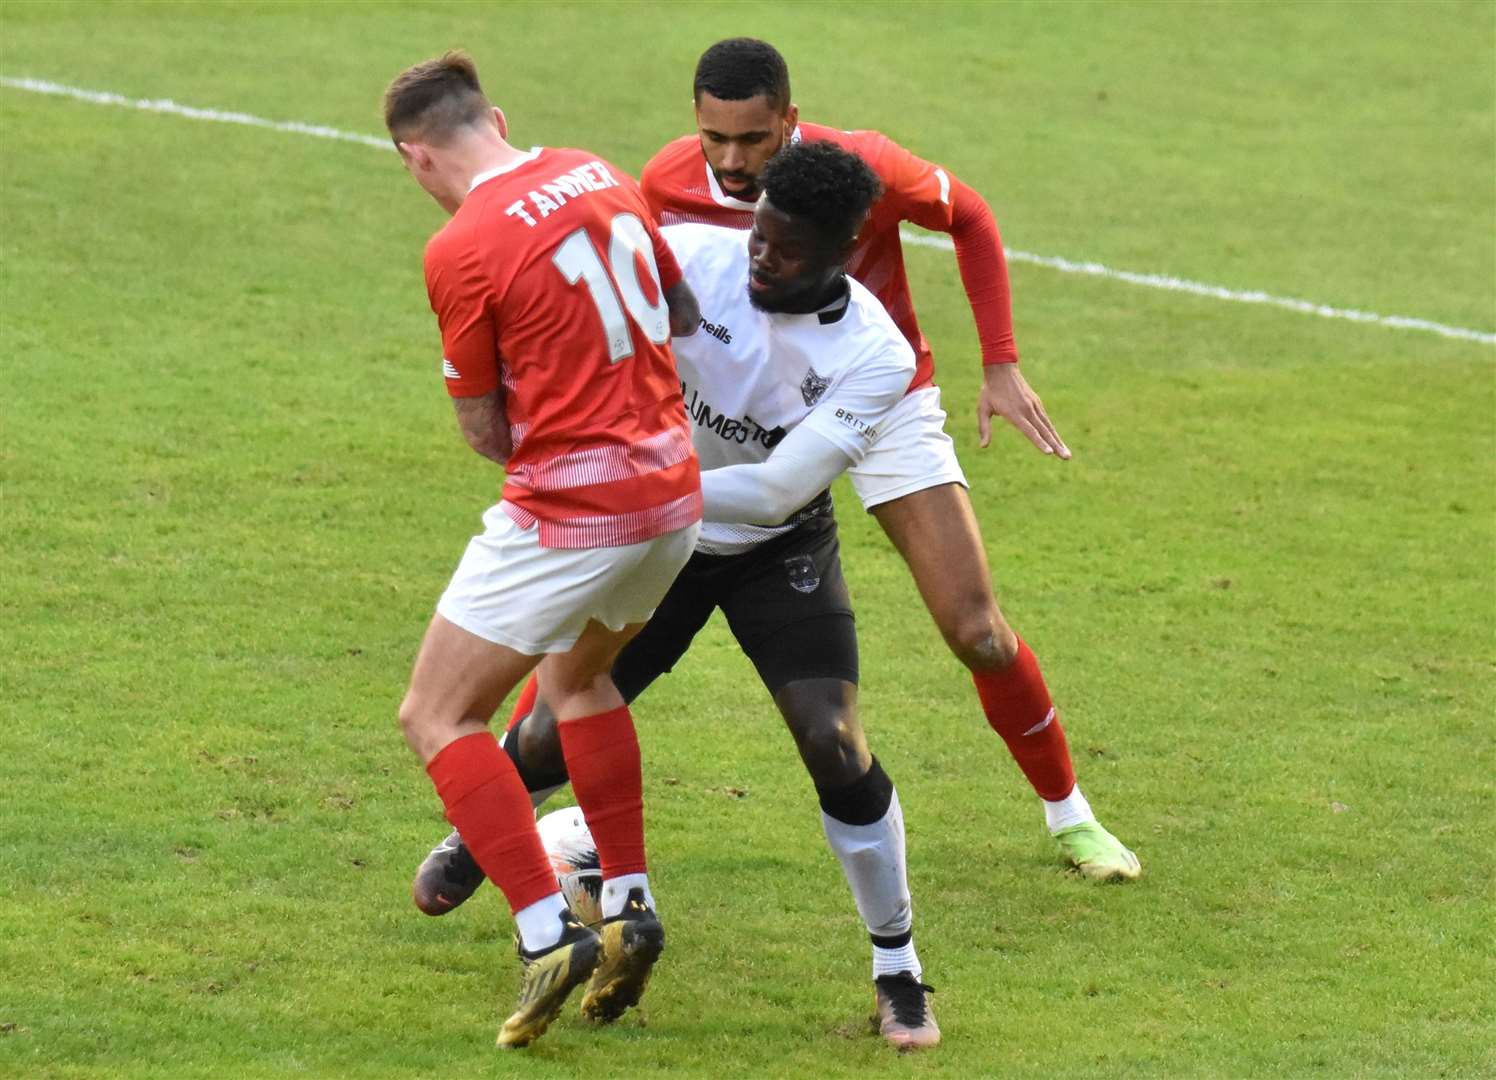 Ebbsfleet's Craig Tanner is stopped in his tracks against Weymouth's Ahkeem Rose. Picture: Ed Miller/EUFC